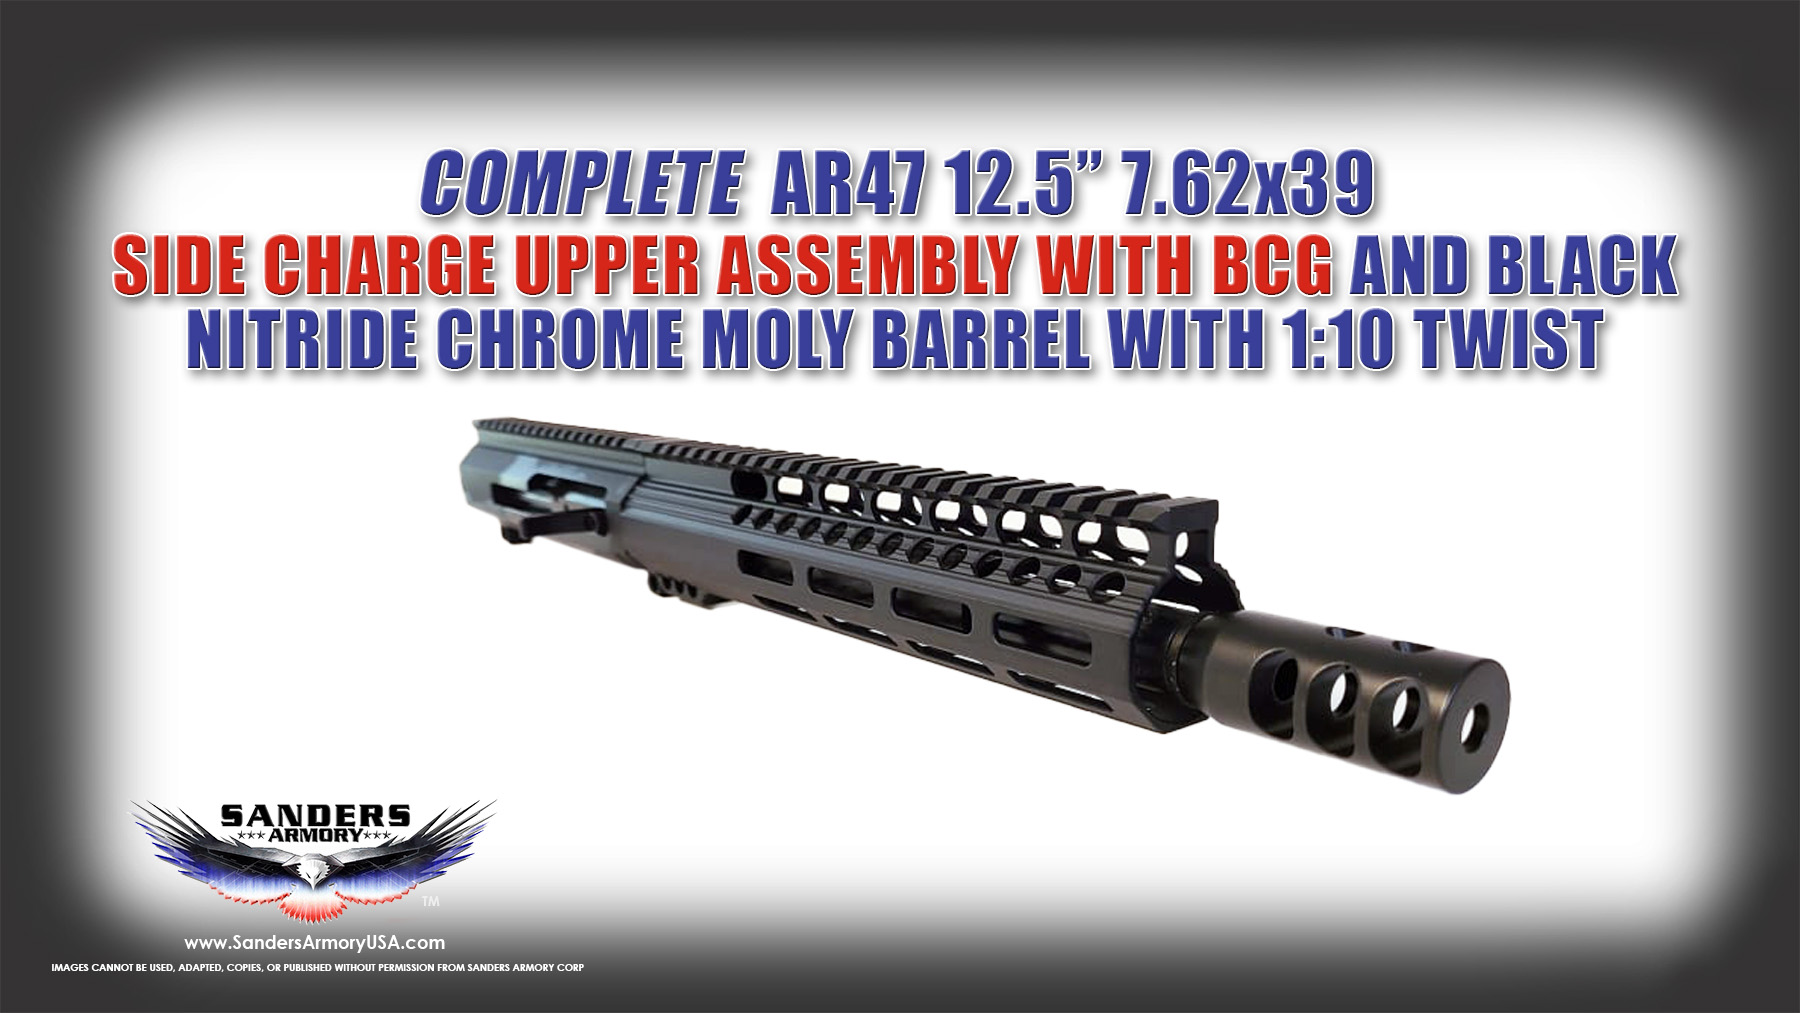 Sanders Armory 12.5" 7.62 x 39 Side Charge Upper Assembly